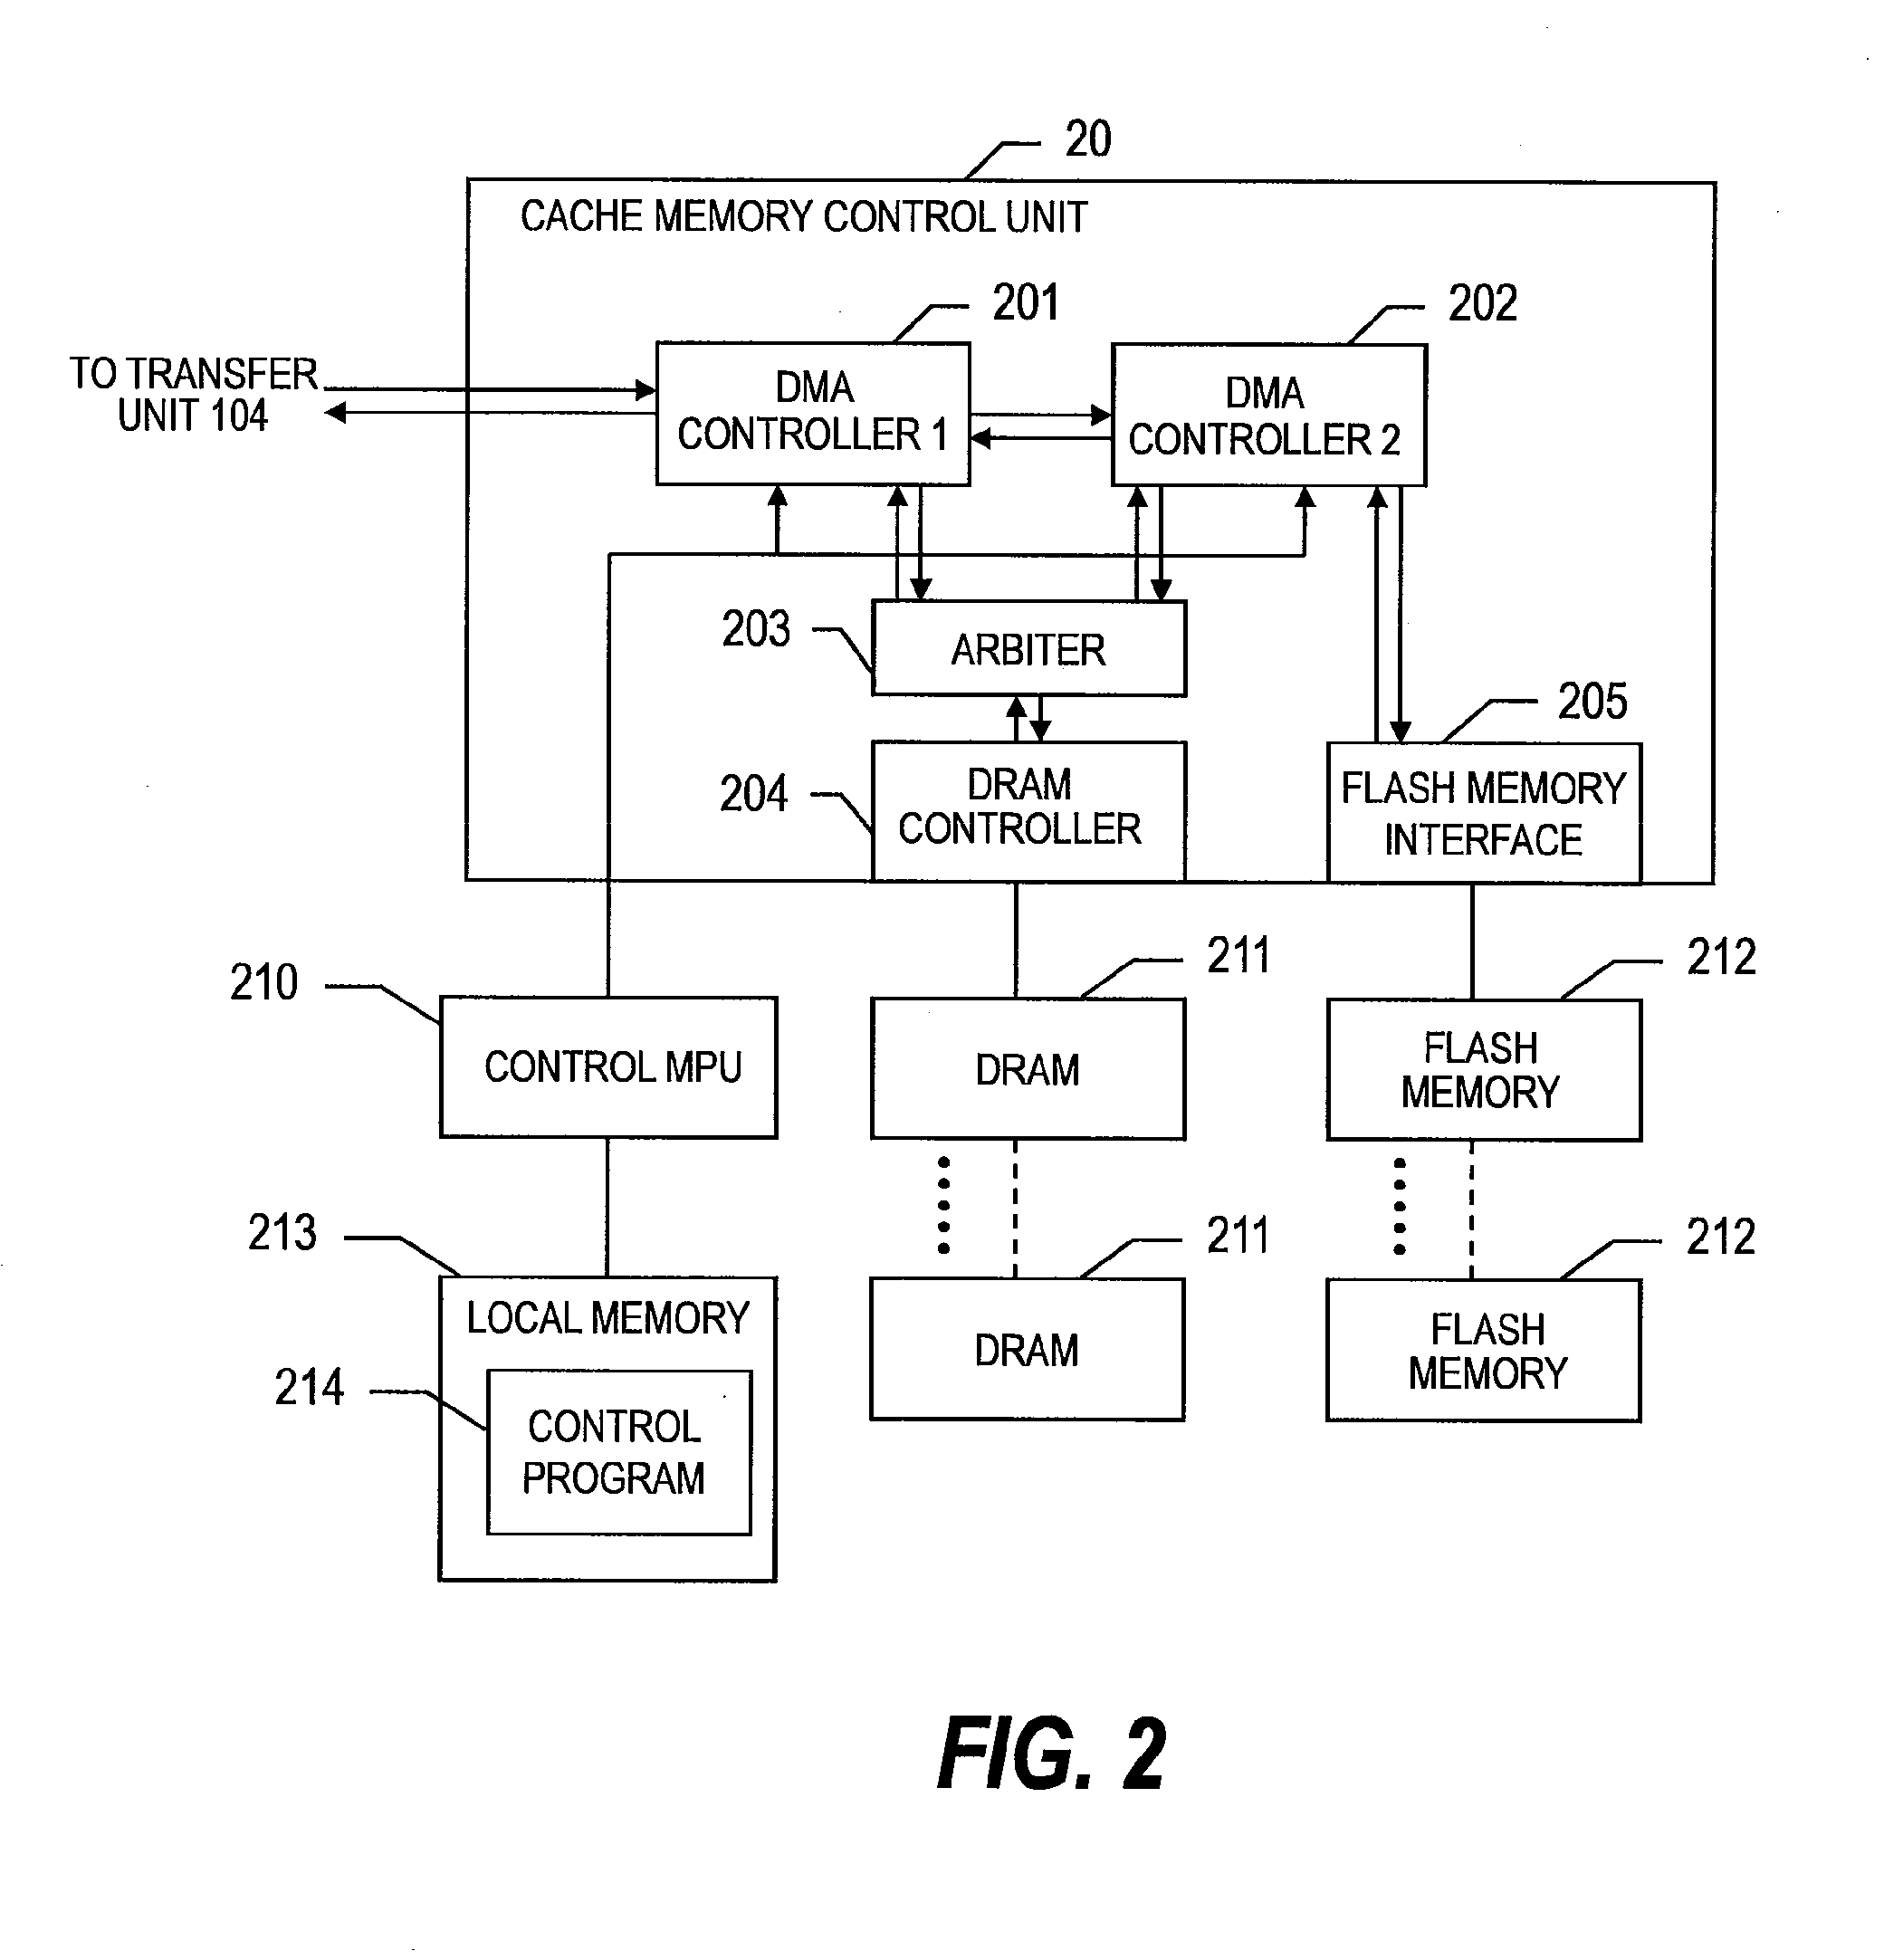 Storage system which utilizes two kinds of memory devices as its cache memory and method of controlling the storage system